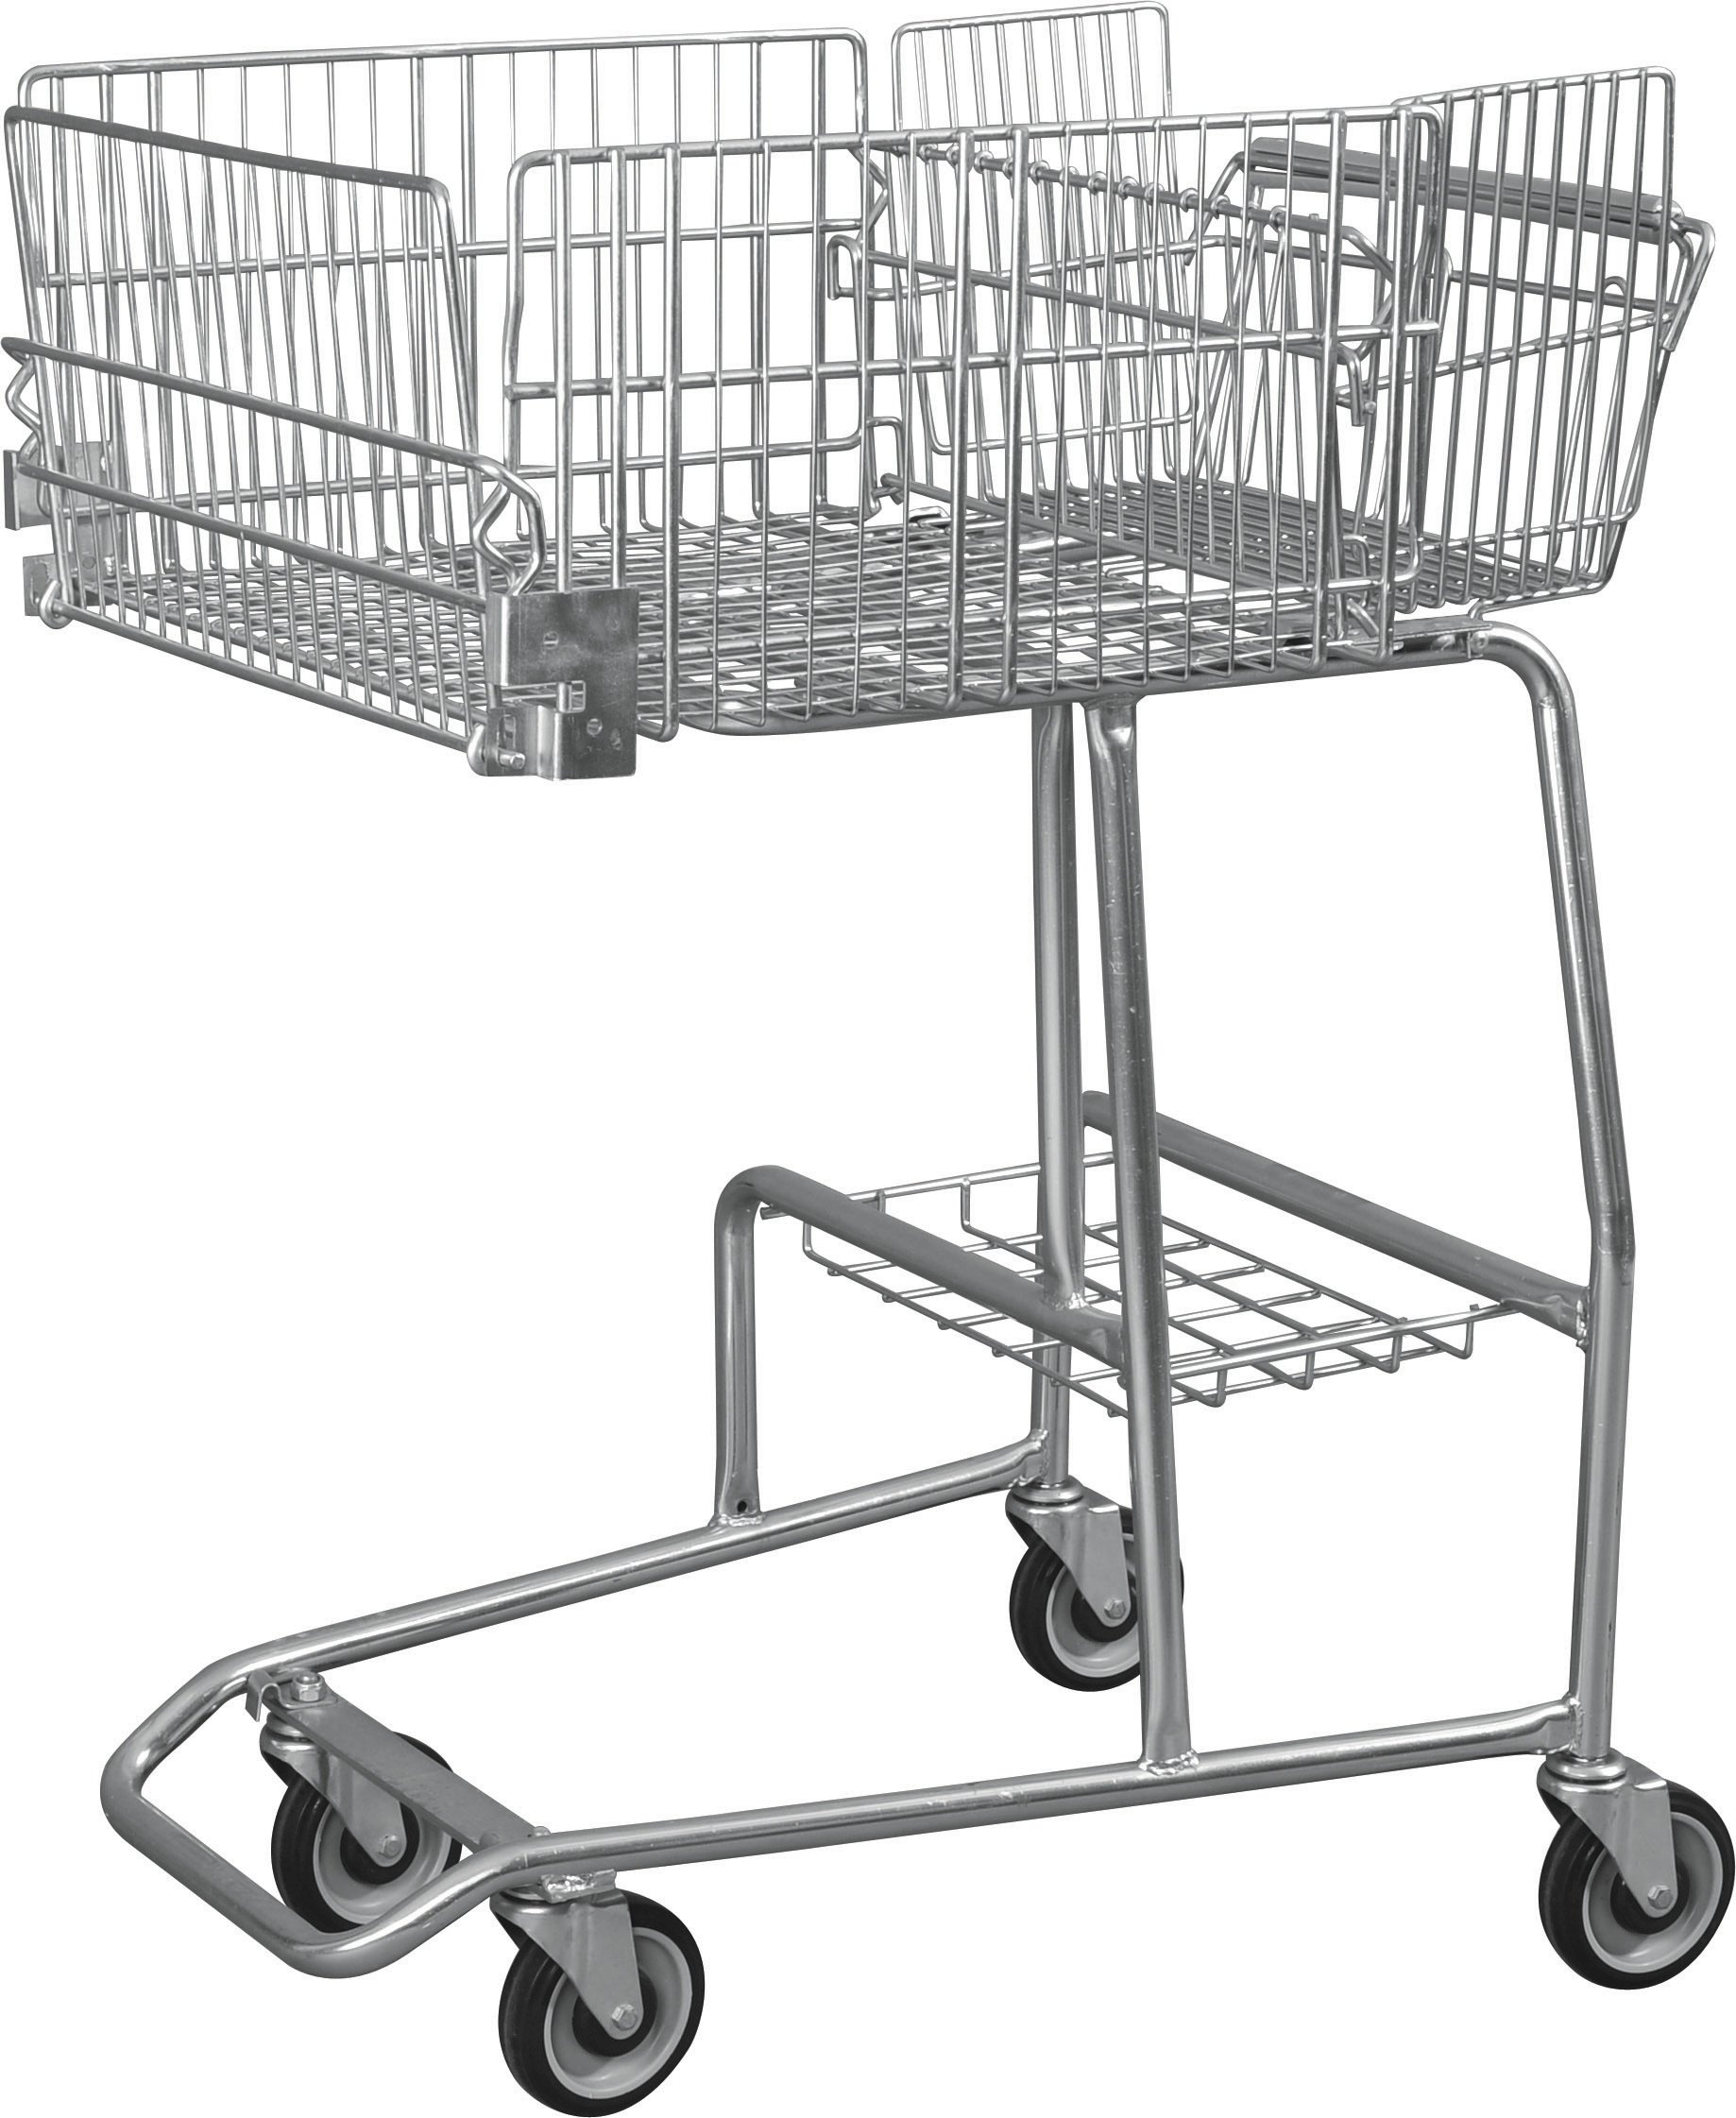 Low Carbon Steel Wire Basket Disabled Shopping Trolley For Old / Disability Persons